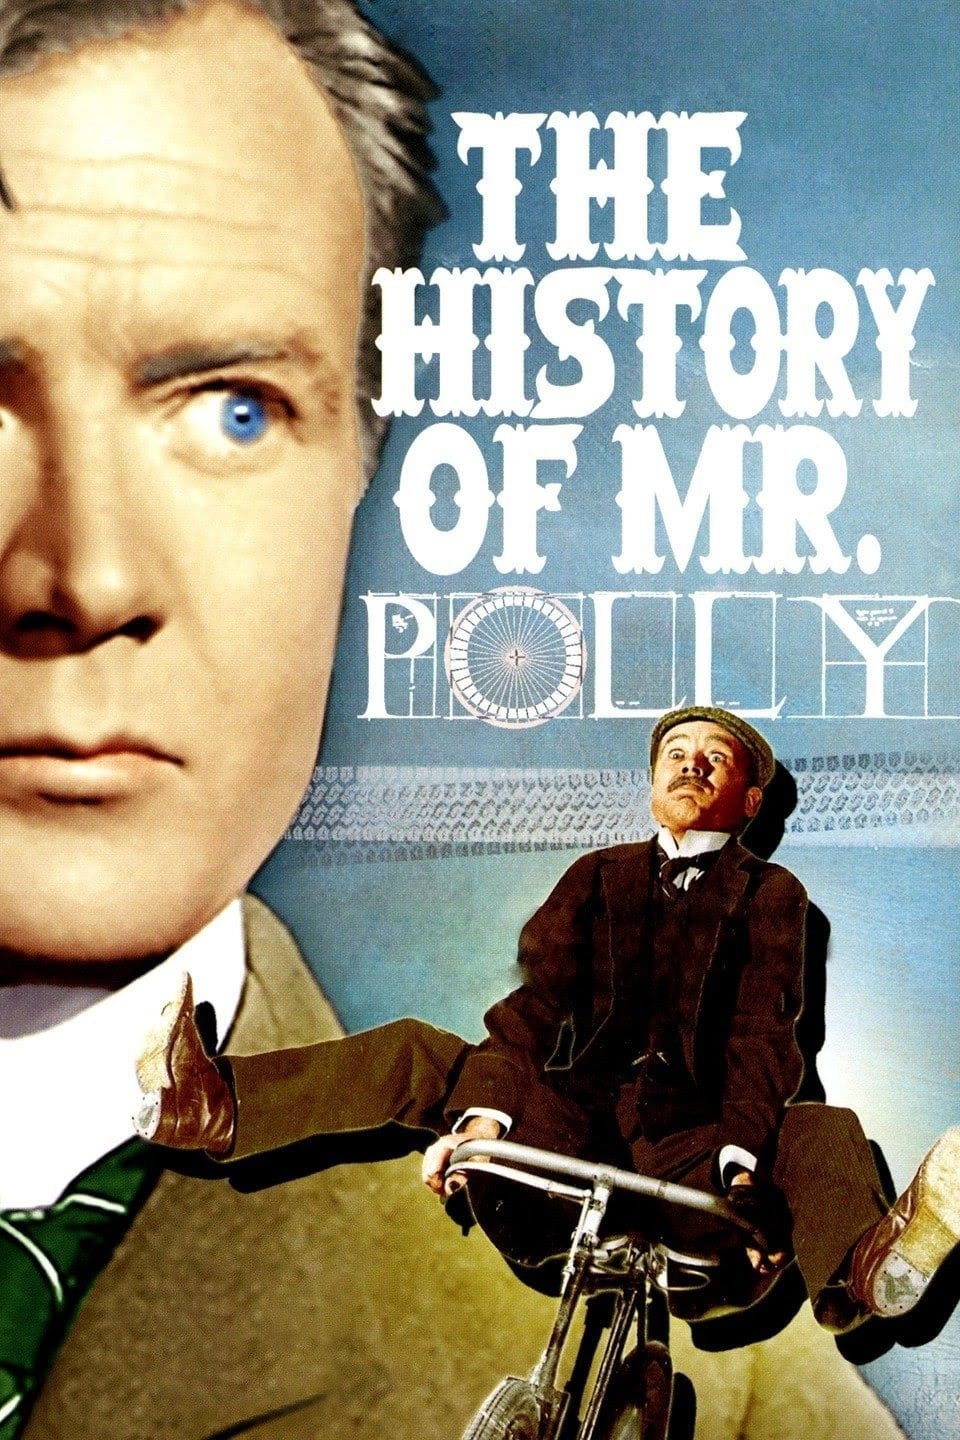 The History of Mr. Polly (1949)